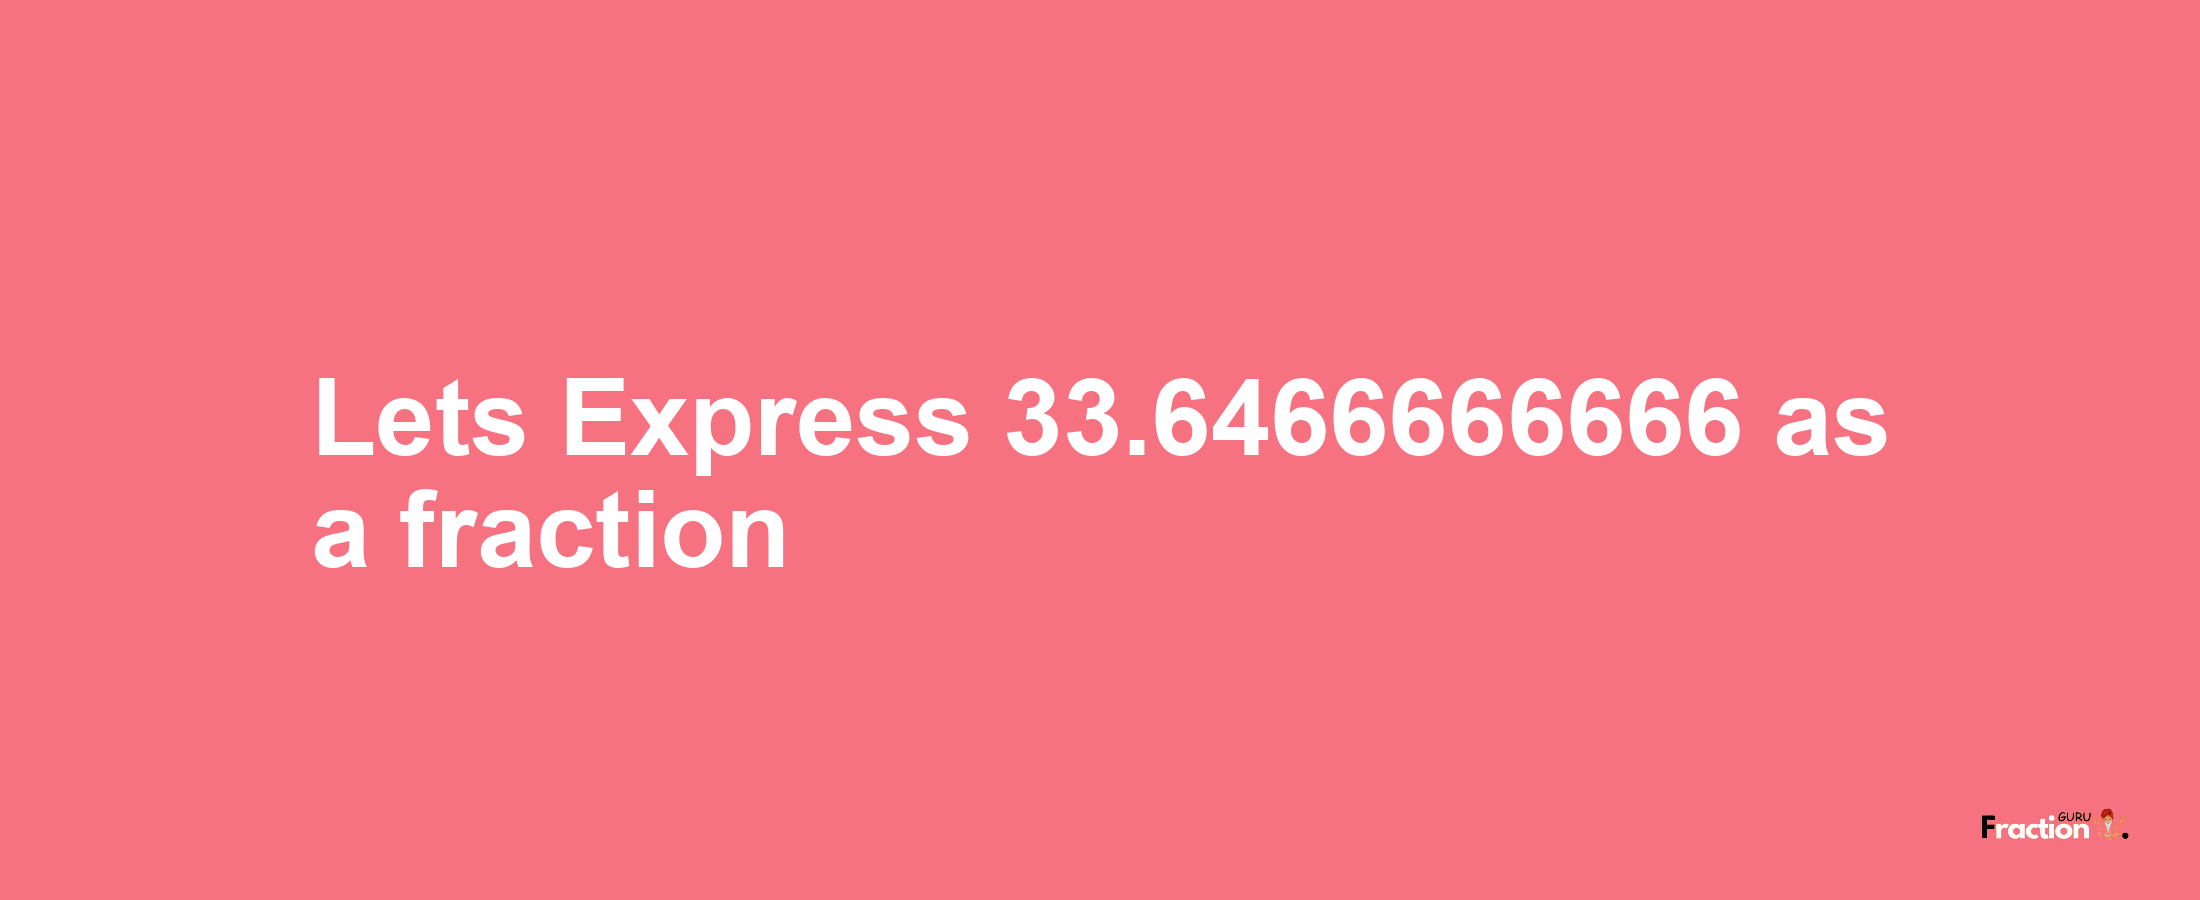 Lets Express 33.6466666666 as afraction